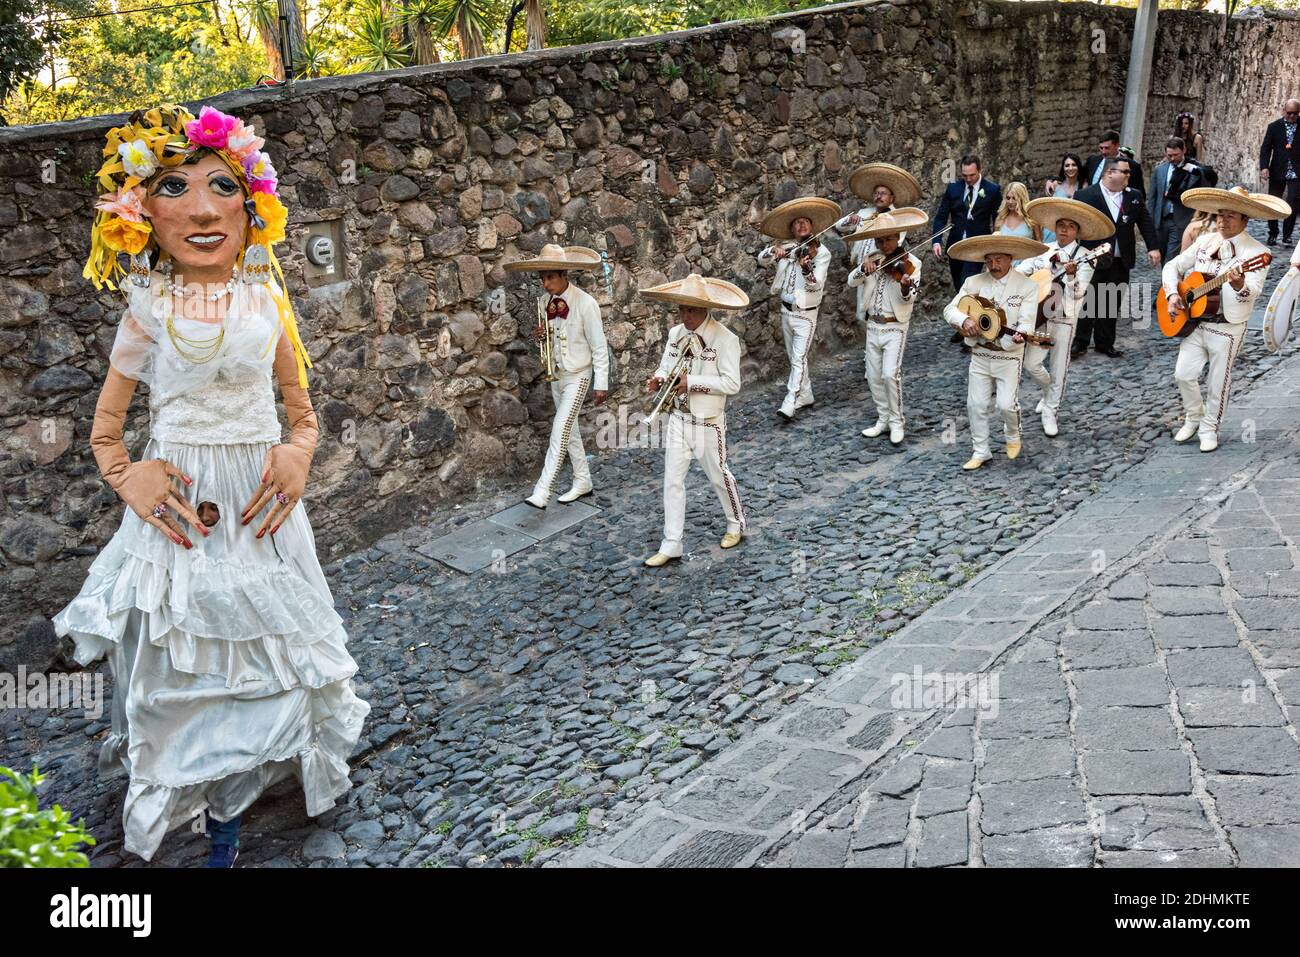 A traditional Mexican mariachi band plays as giant puppets called mojigangas dance during a wedding celebration parading through the streets San Miguel de Allende, Guanajuato, Mexico. Stock Photo